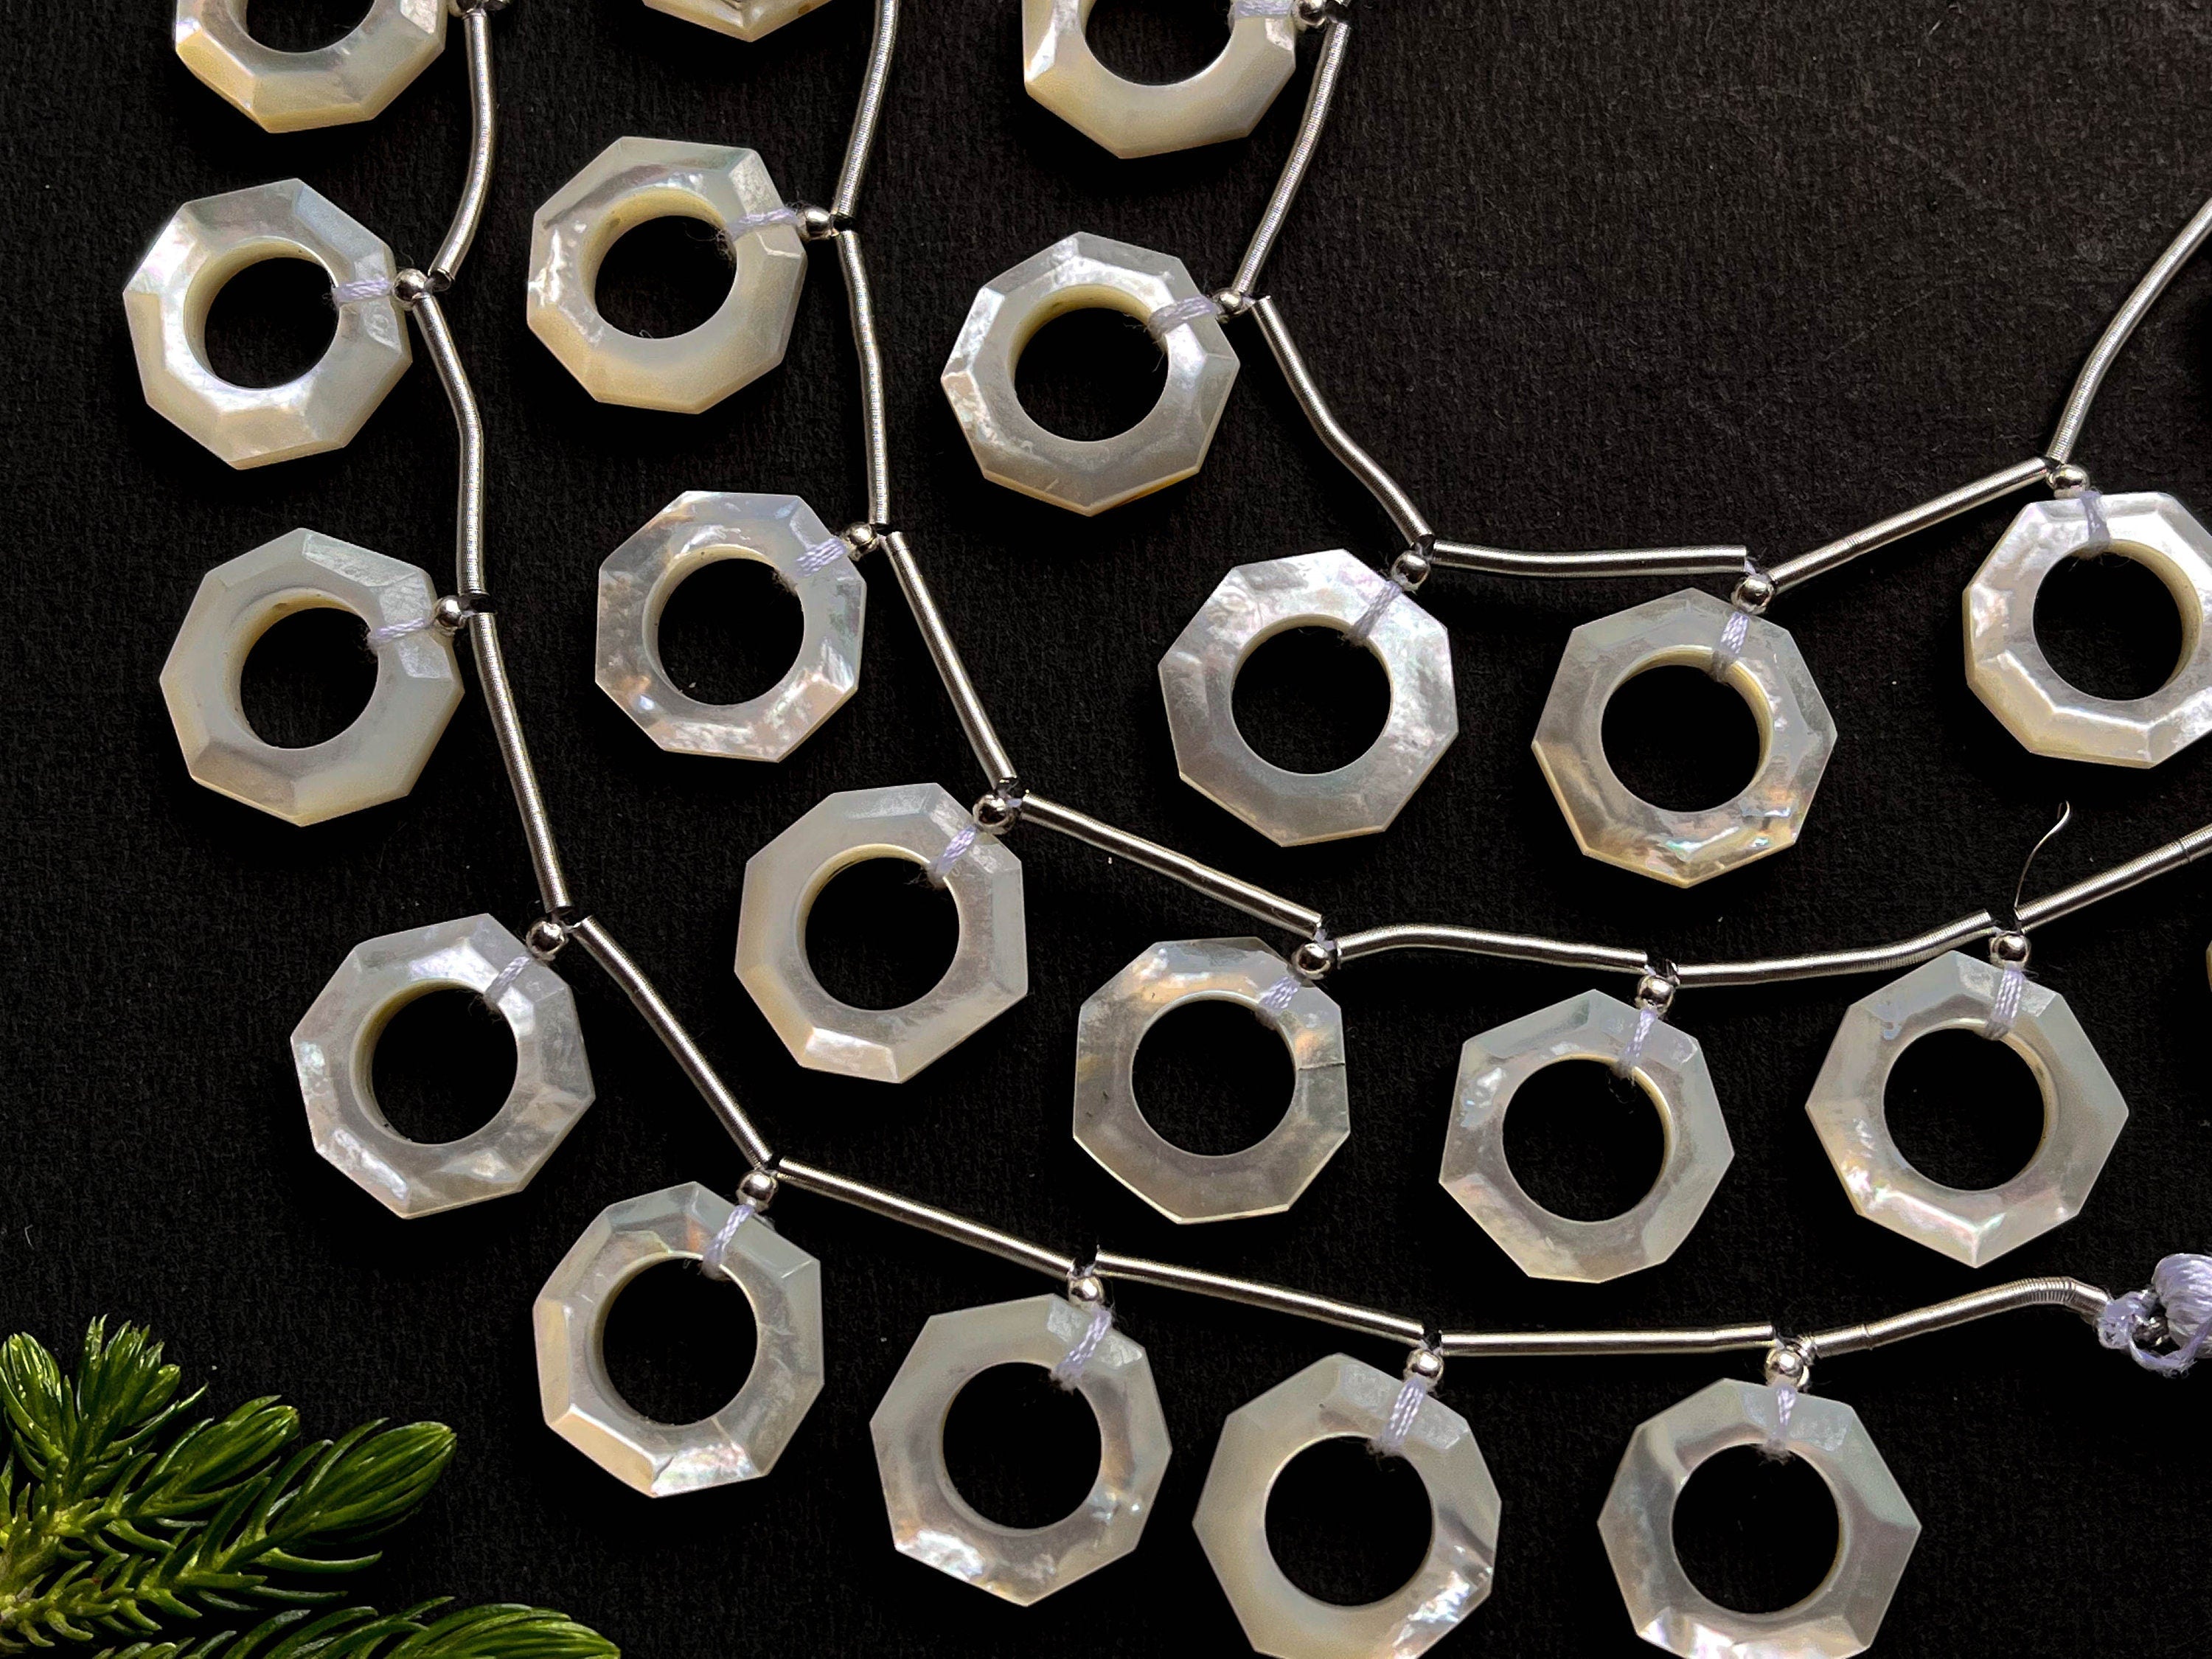 10 Pieces MOTHER OF PEARL Octagon Shape Faceted Hoop Beads, Natural Mother of Pearl Beads, Mother of Pearl Hoop Beads, Rare Gemstone Beads Beadsforyourjewelry